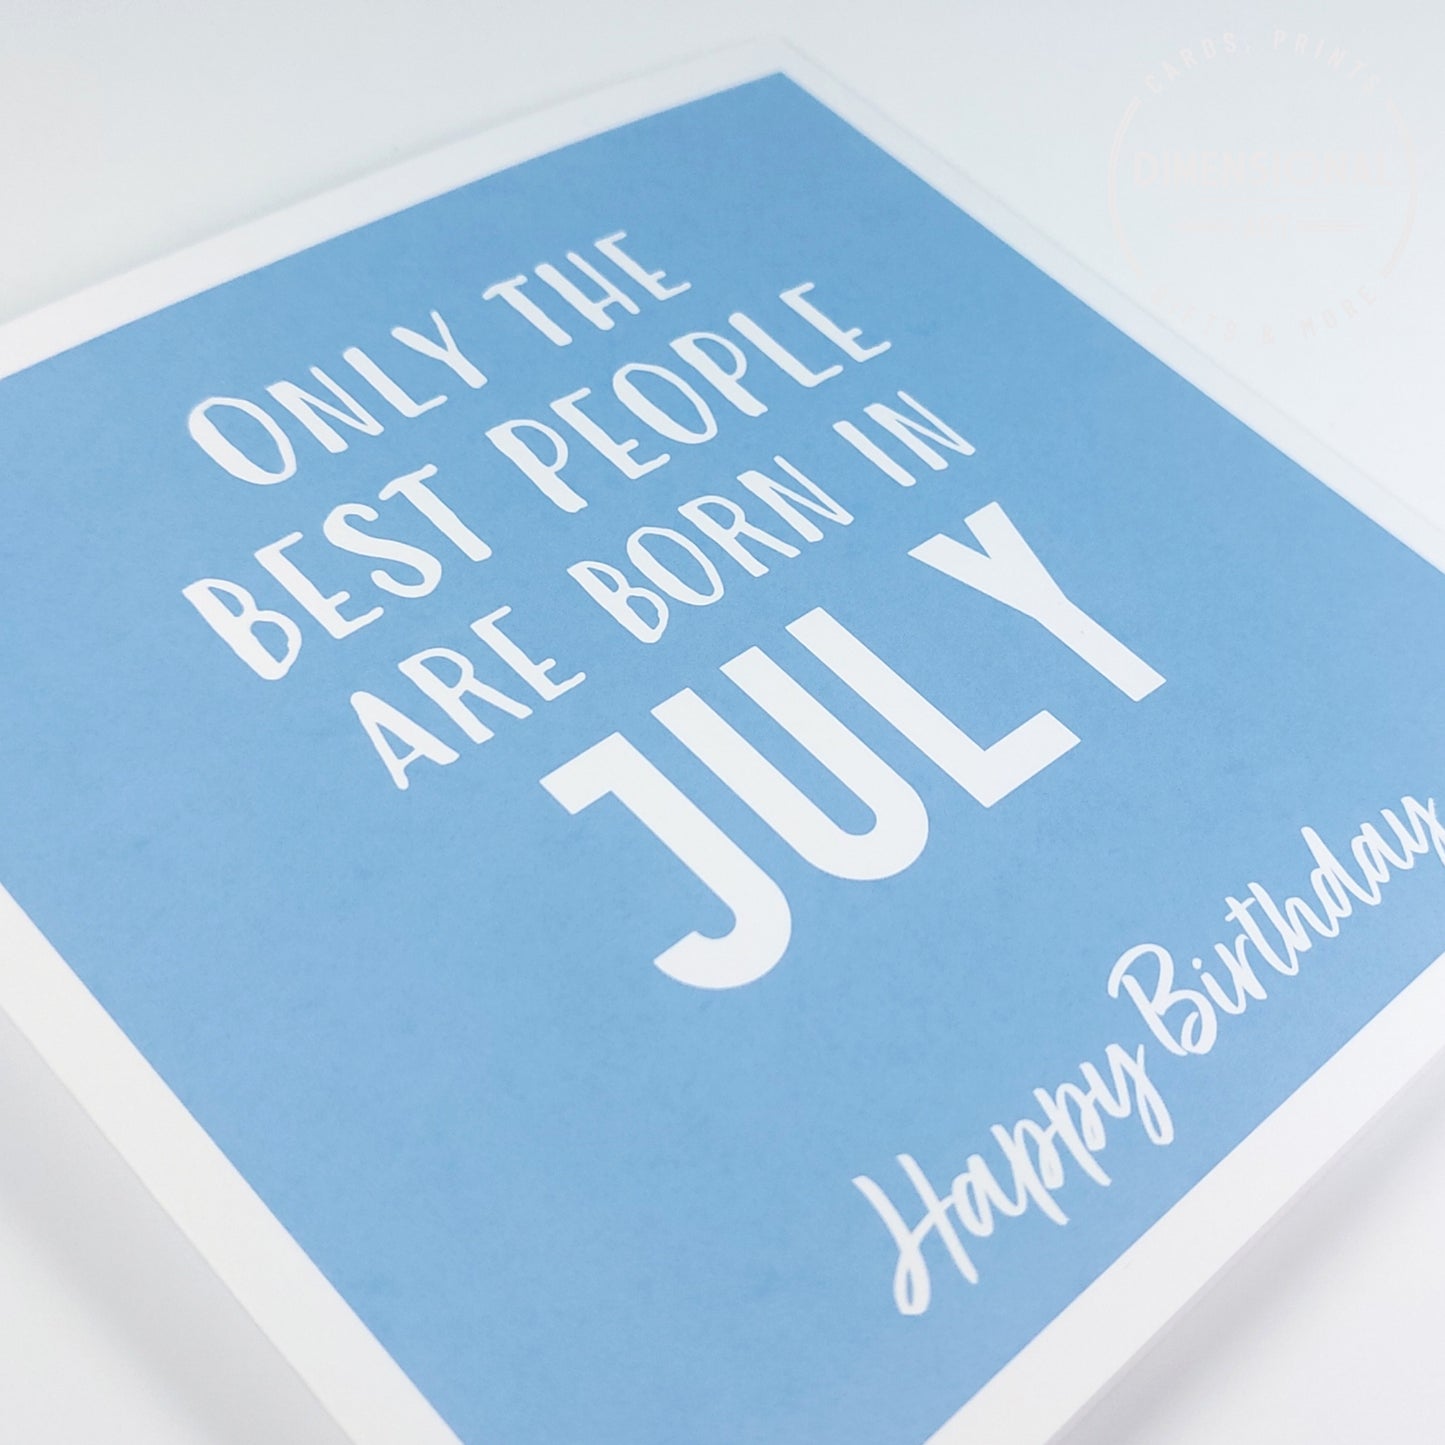 Best people are born in JULY - Birthday Card